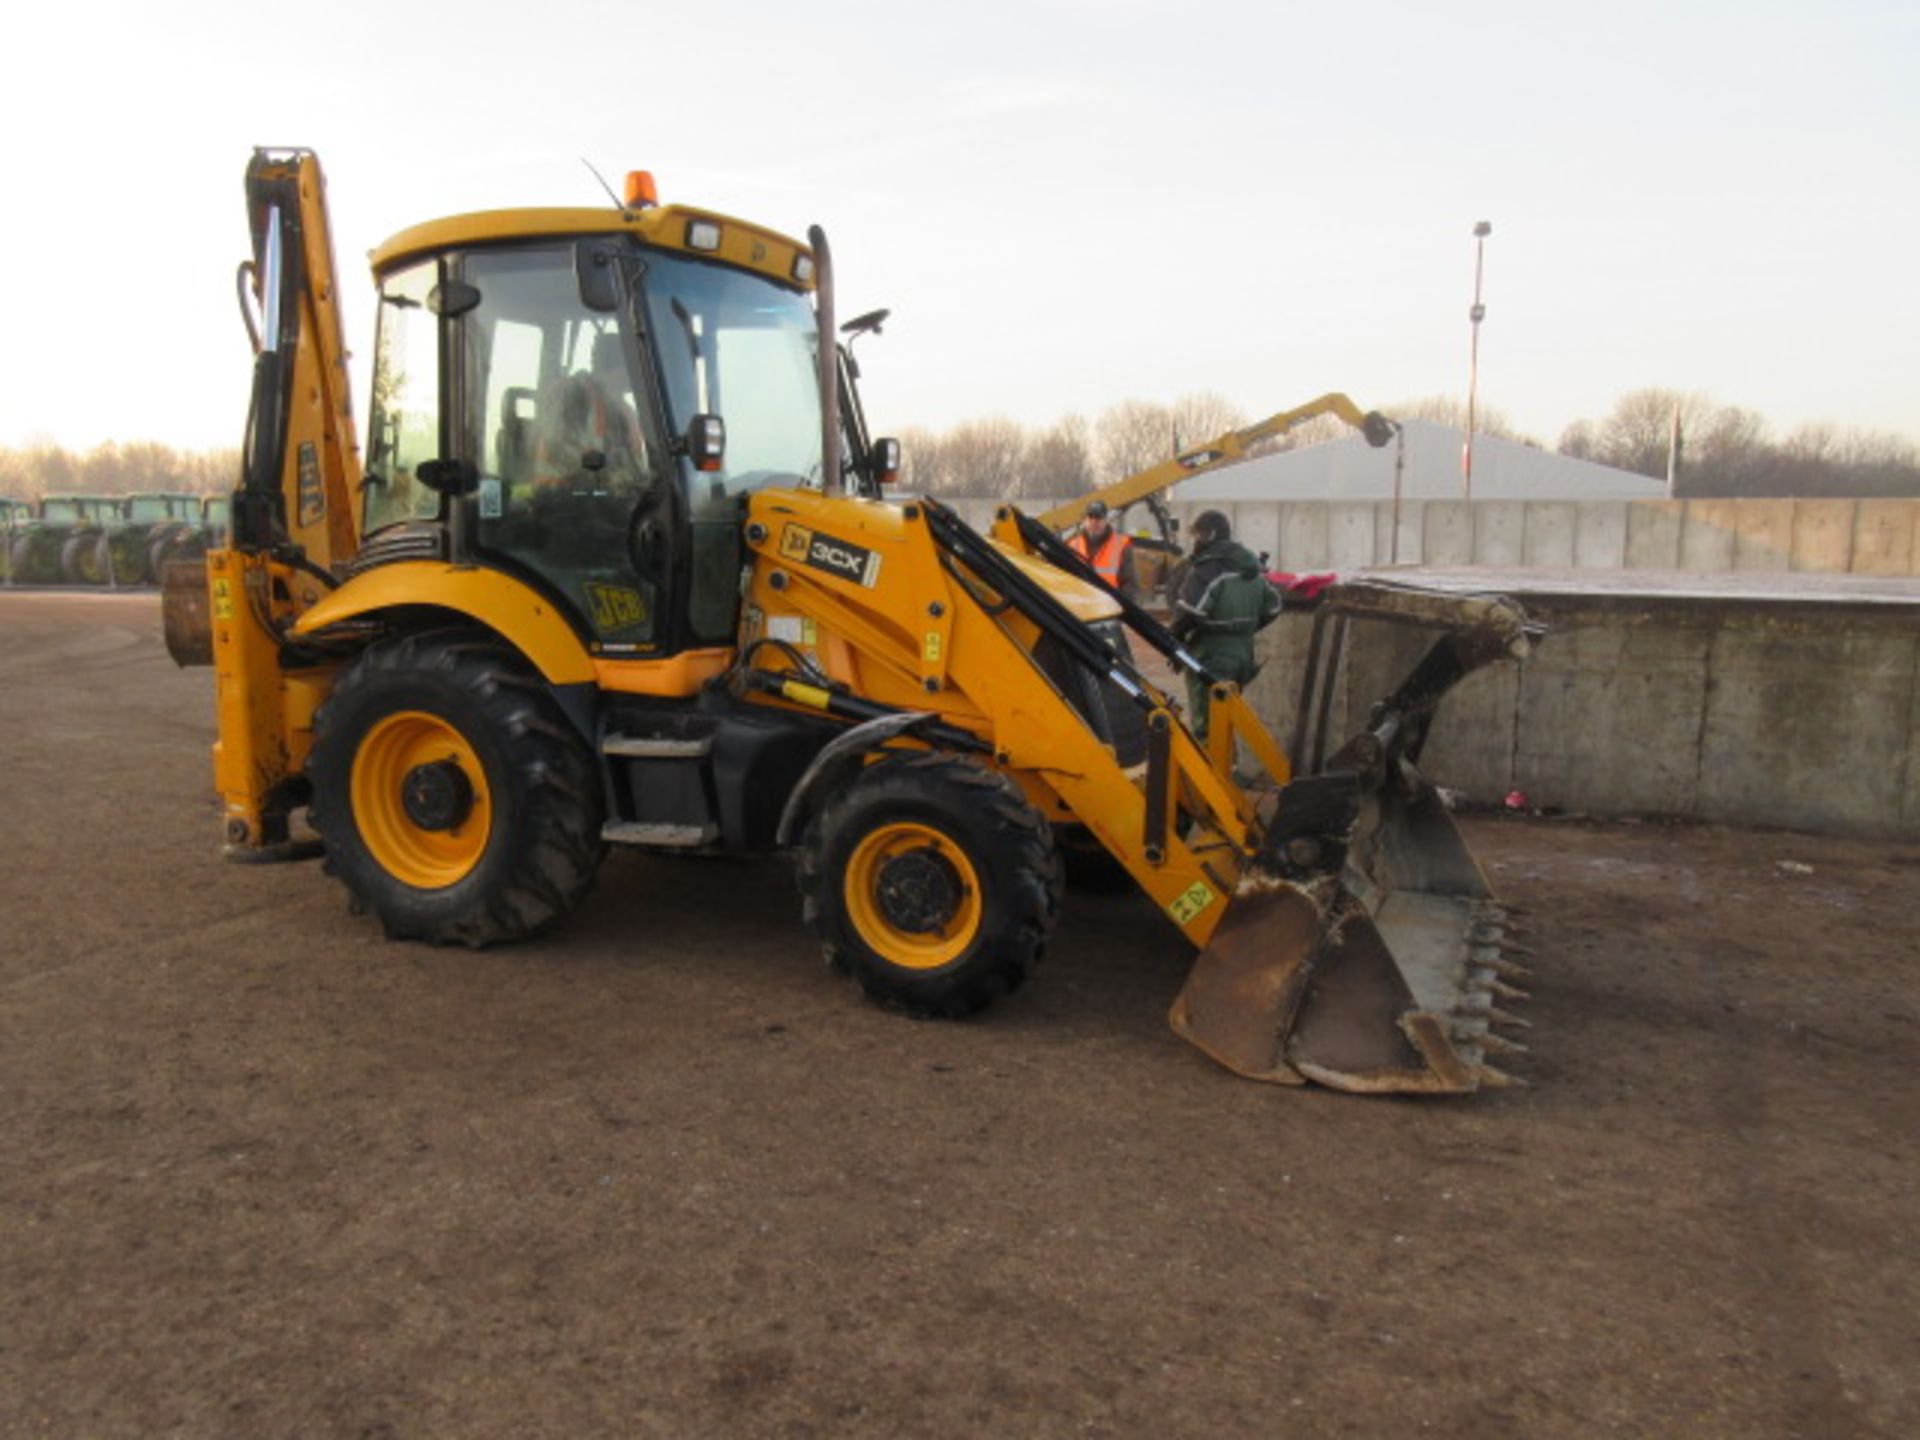 2008 JCB 3CX Sitemaster c/w Piped, Quick Hitch, 4 in 1 Bucket Ser. No. 81346092 - Image 4 of 8